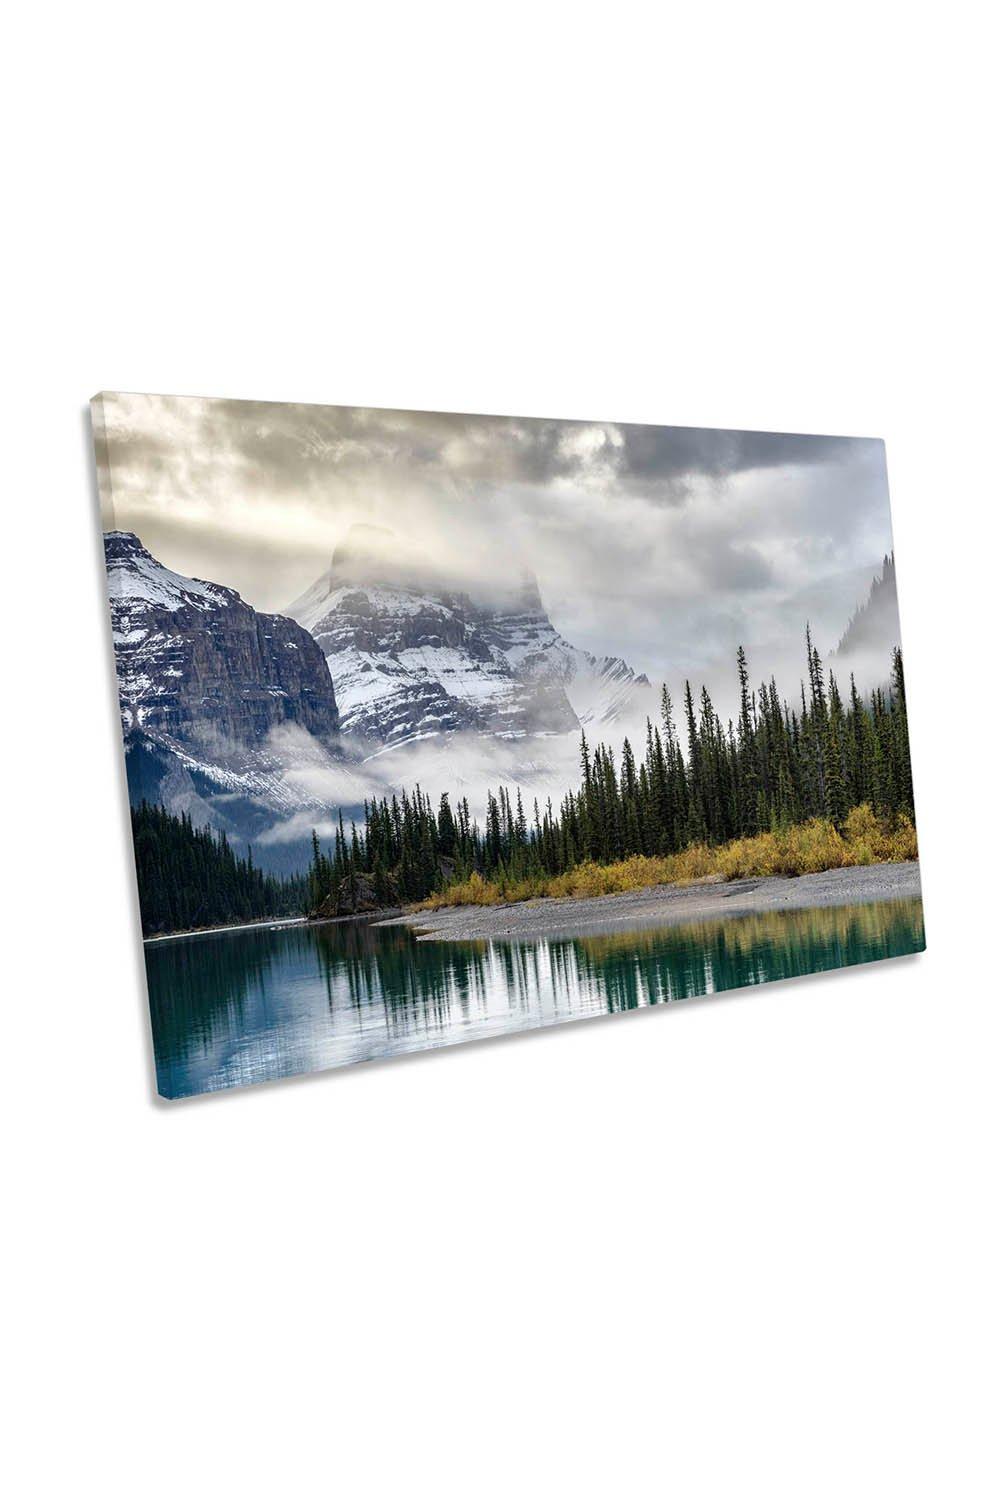 Morning in the Rockies Mountain Landscape Canvas Wall Art Picture Print